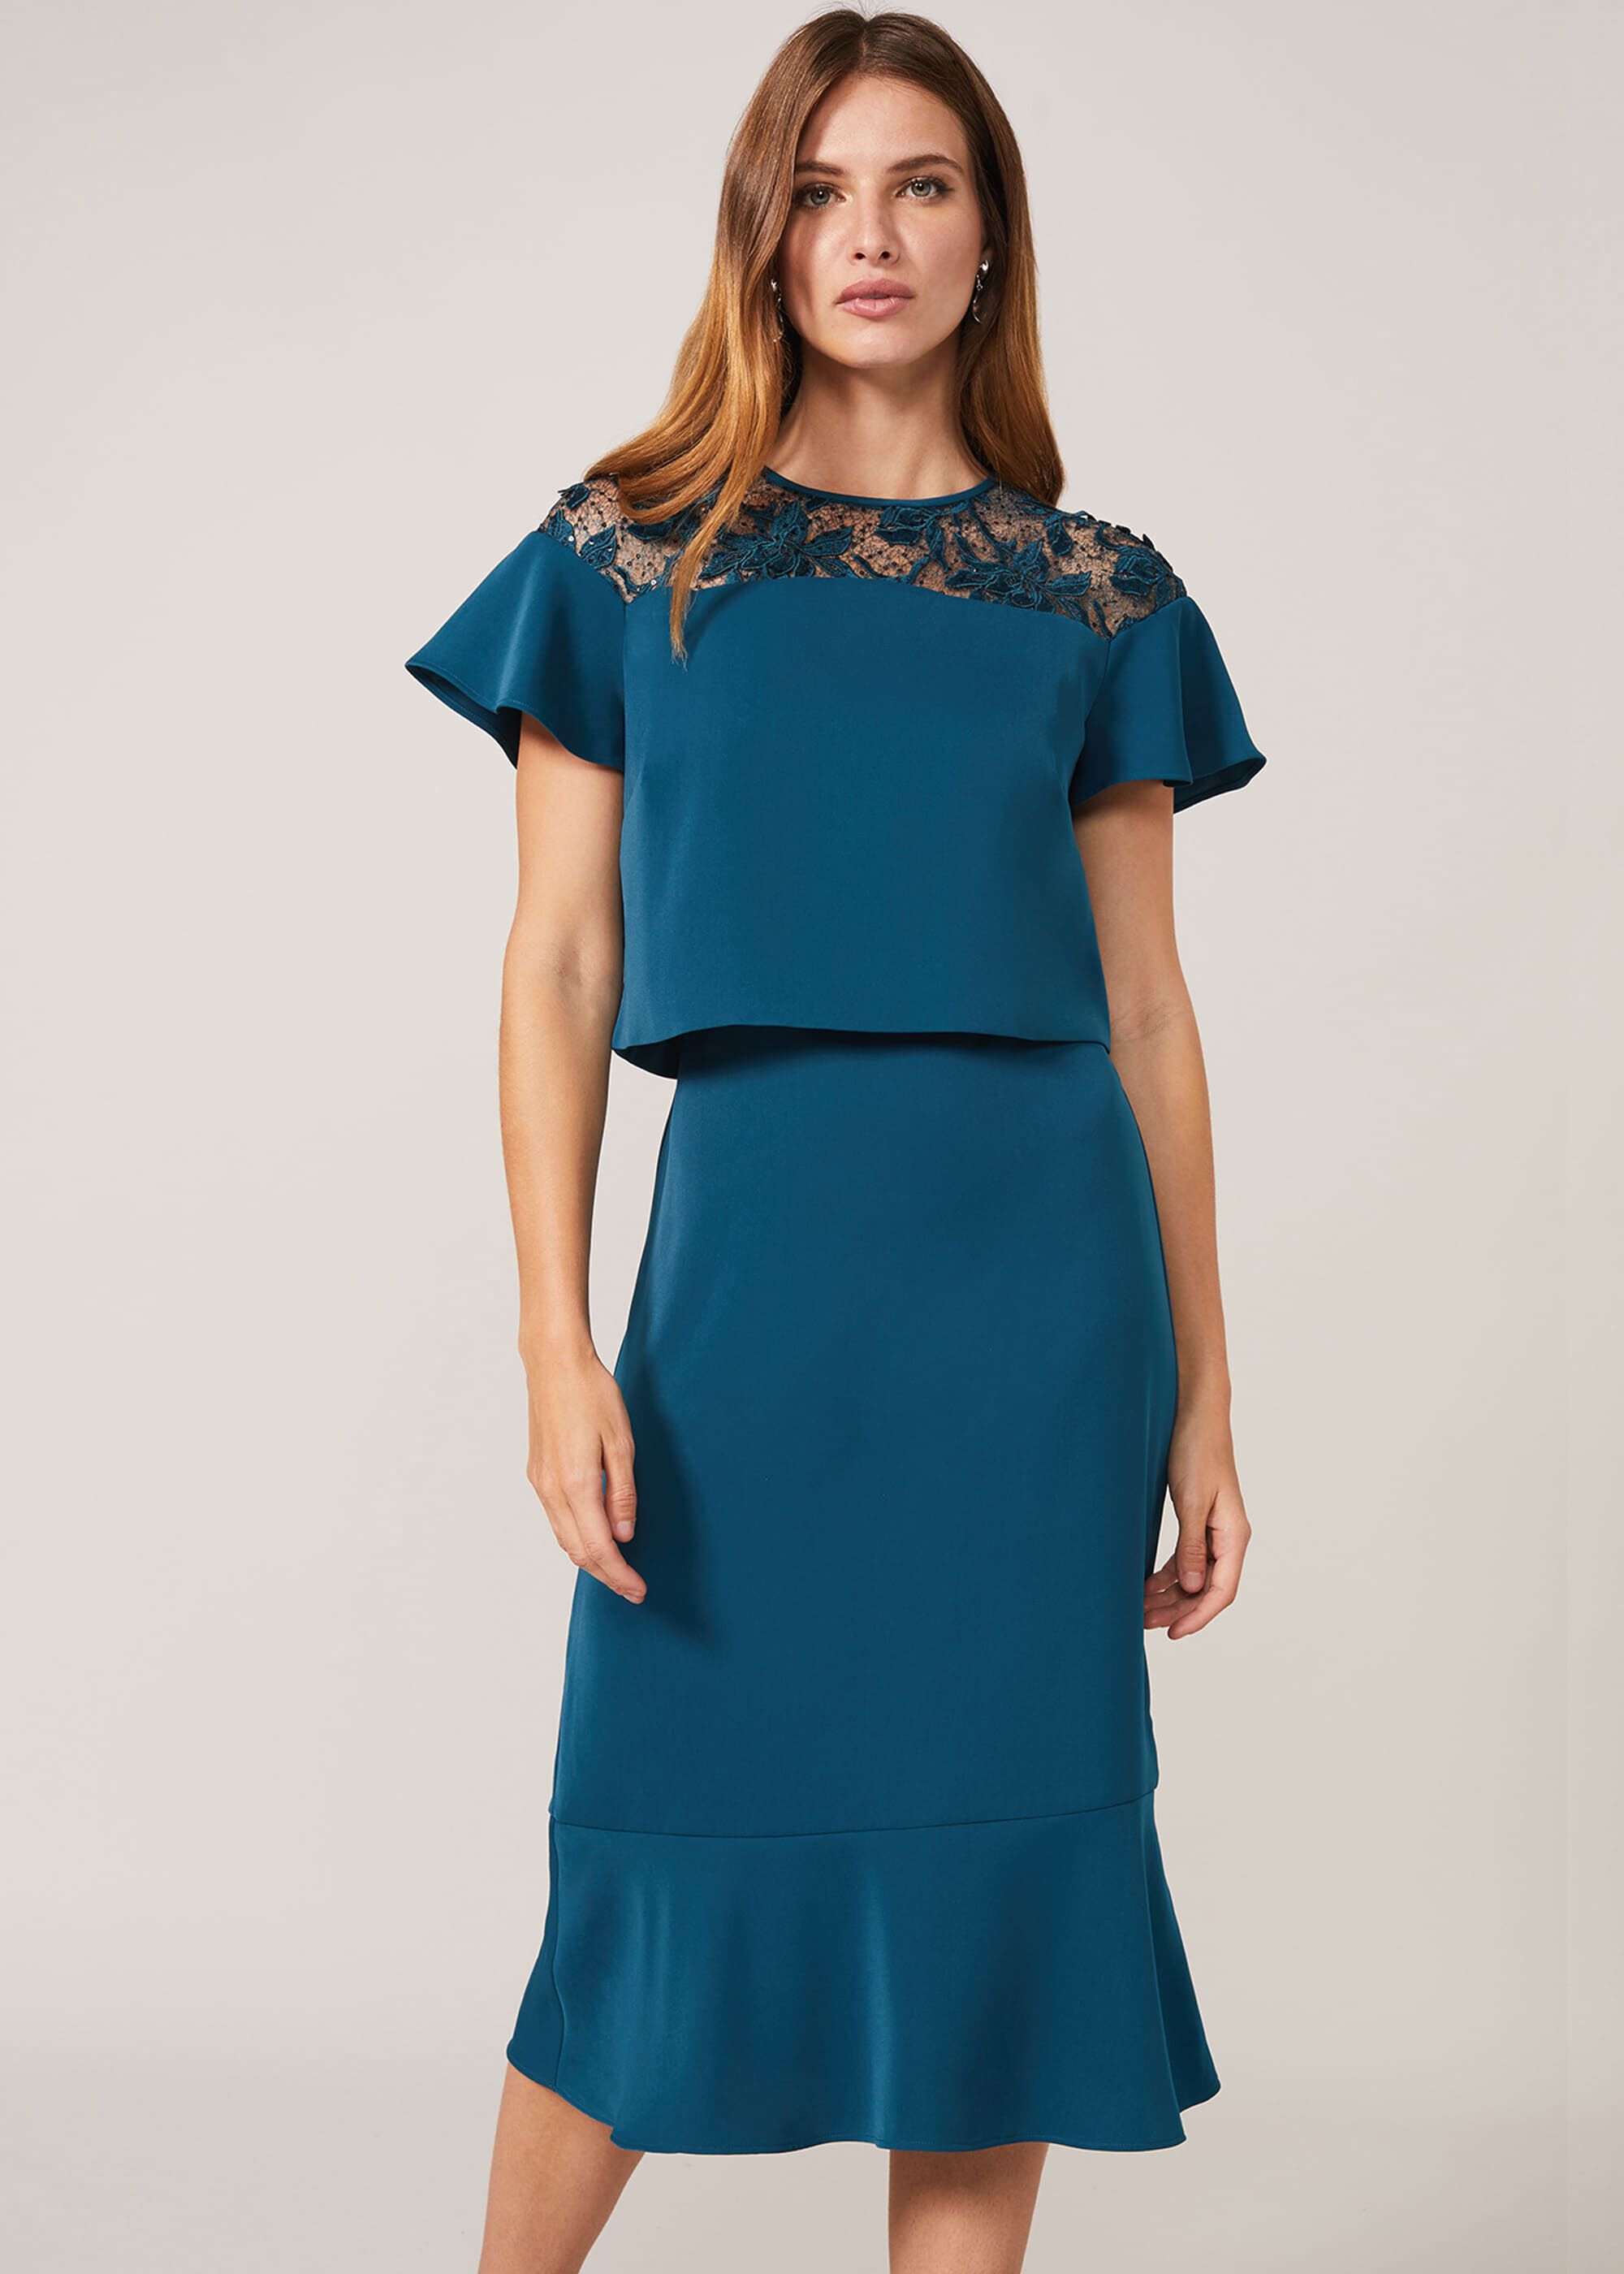 Haidee Double Layer Dress | Phase Eight